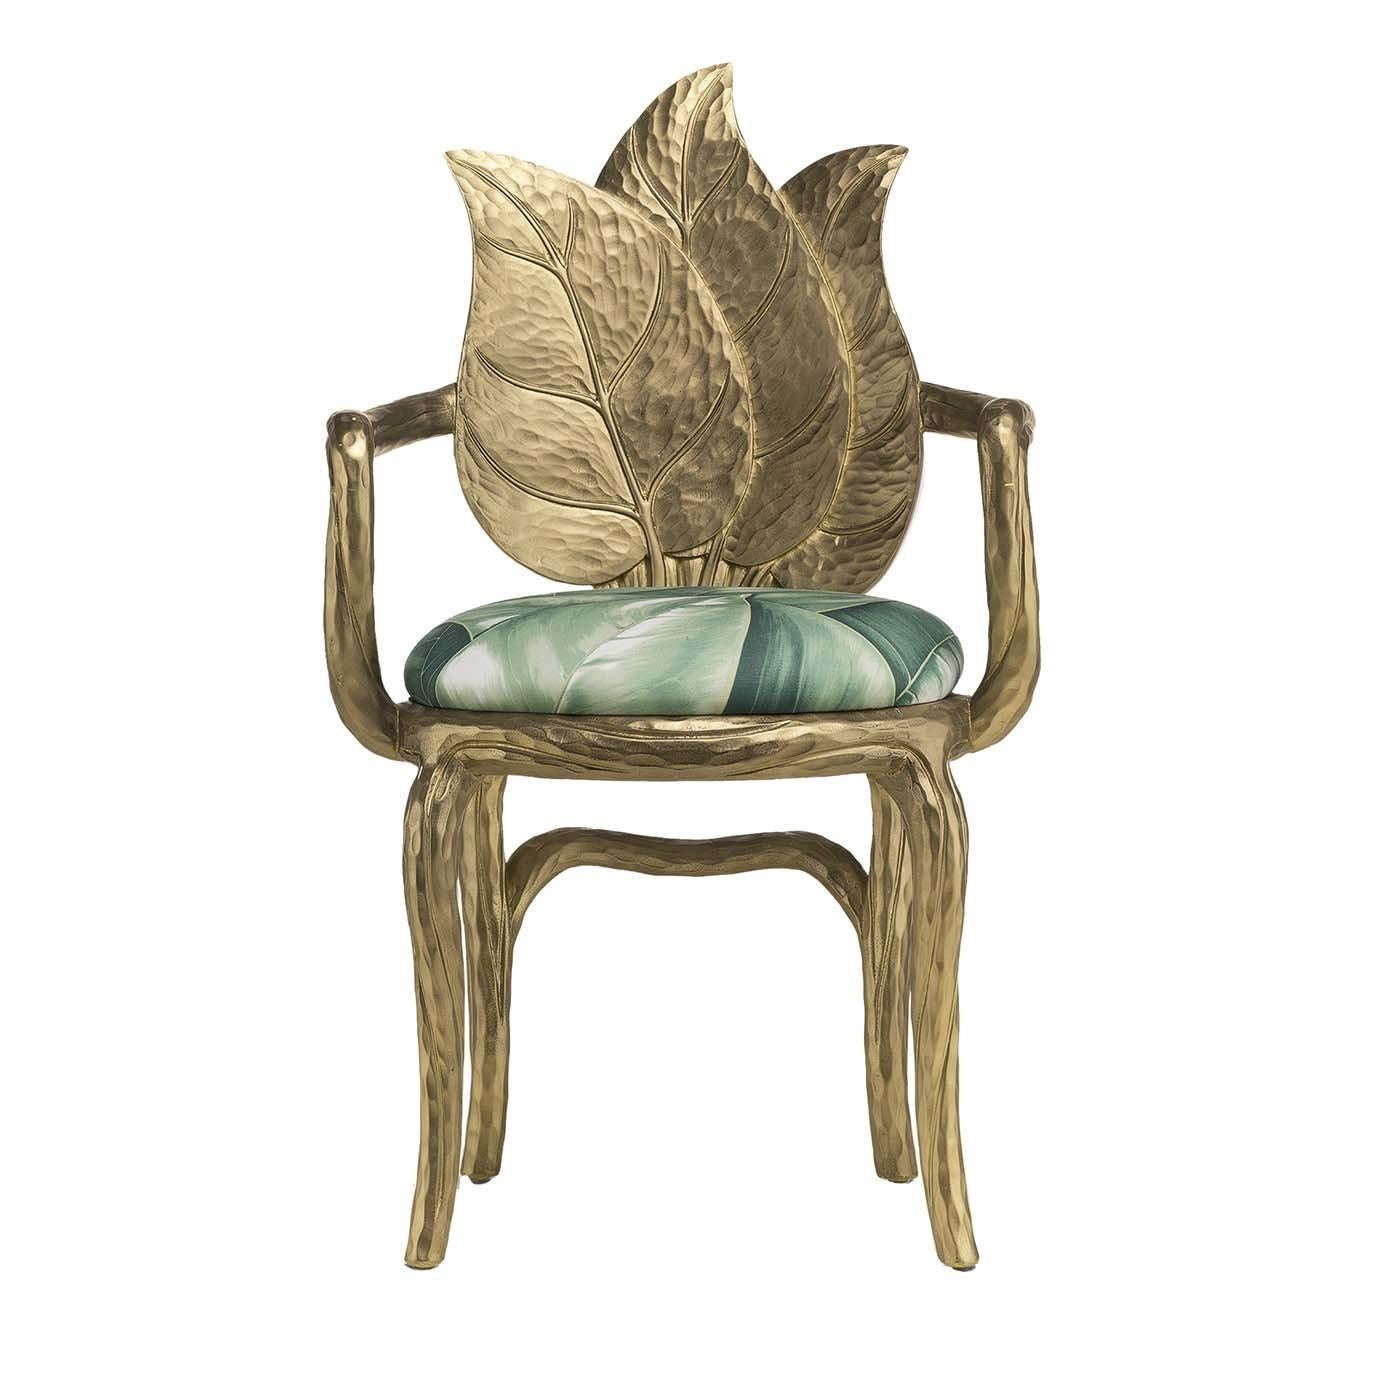 This elegant chair is directly inspired by the grace and elegance of plants, creating an eclectic look that will add unique charm to a modern dining room. The structure of this piece is in wood, elegantly textured to recall the stem of a flower. The